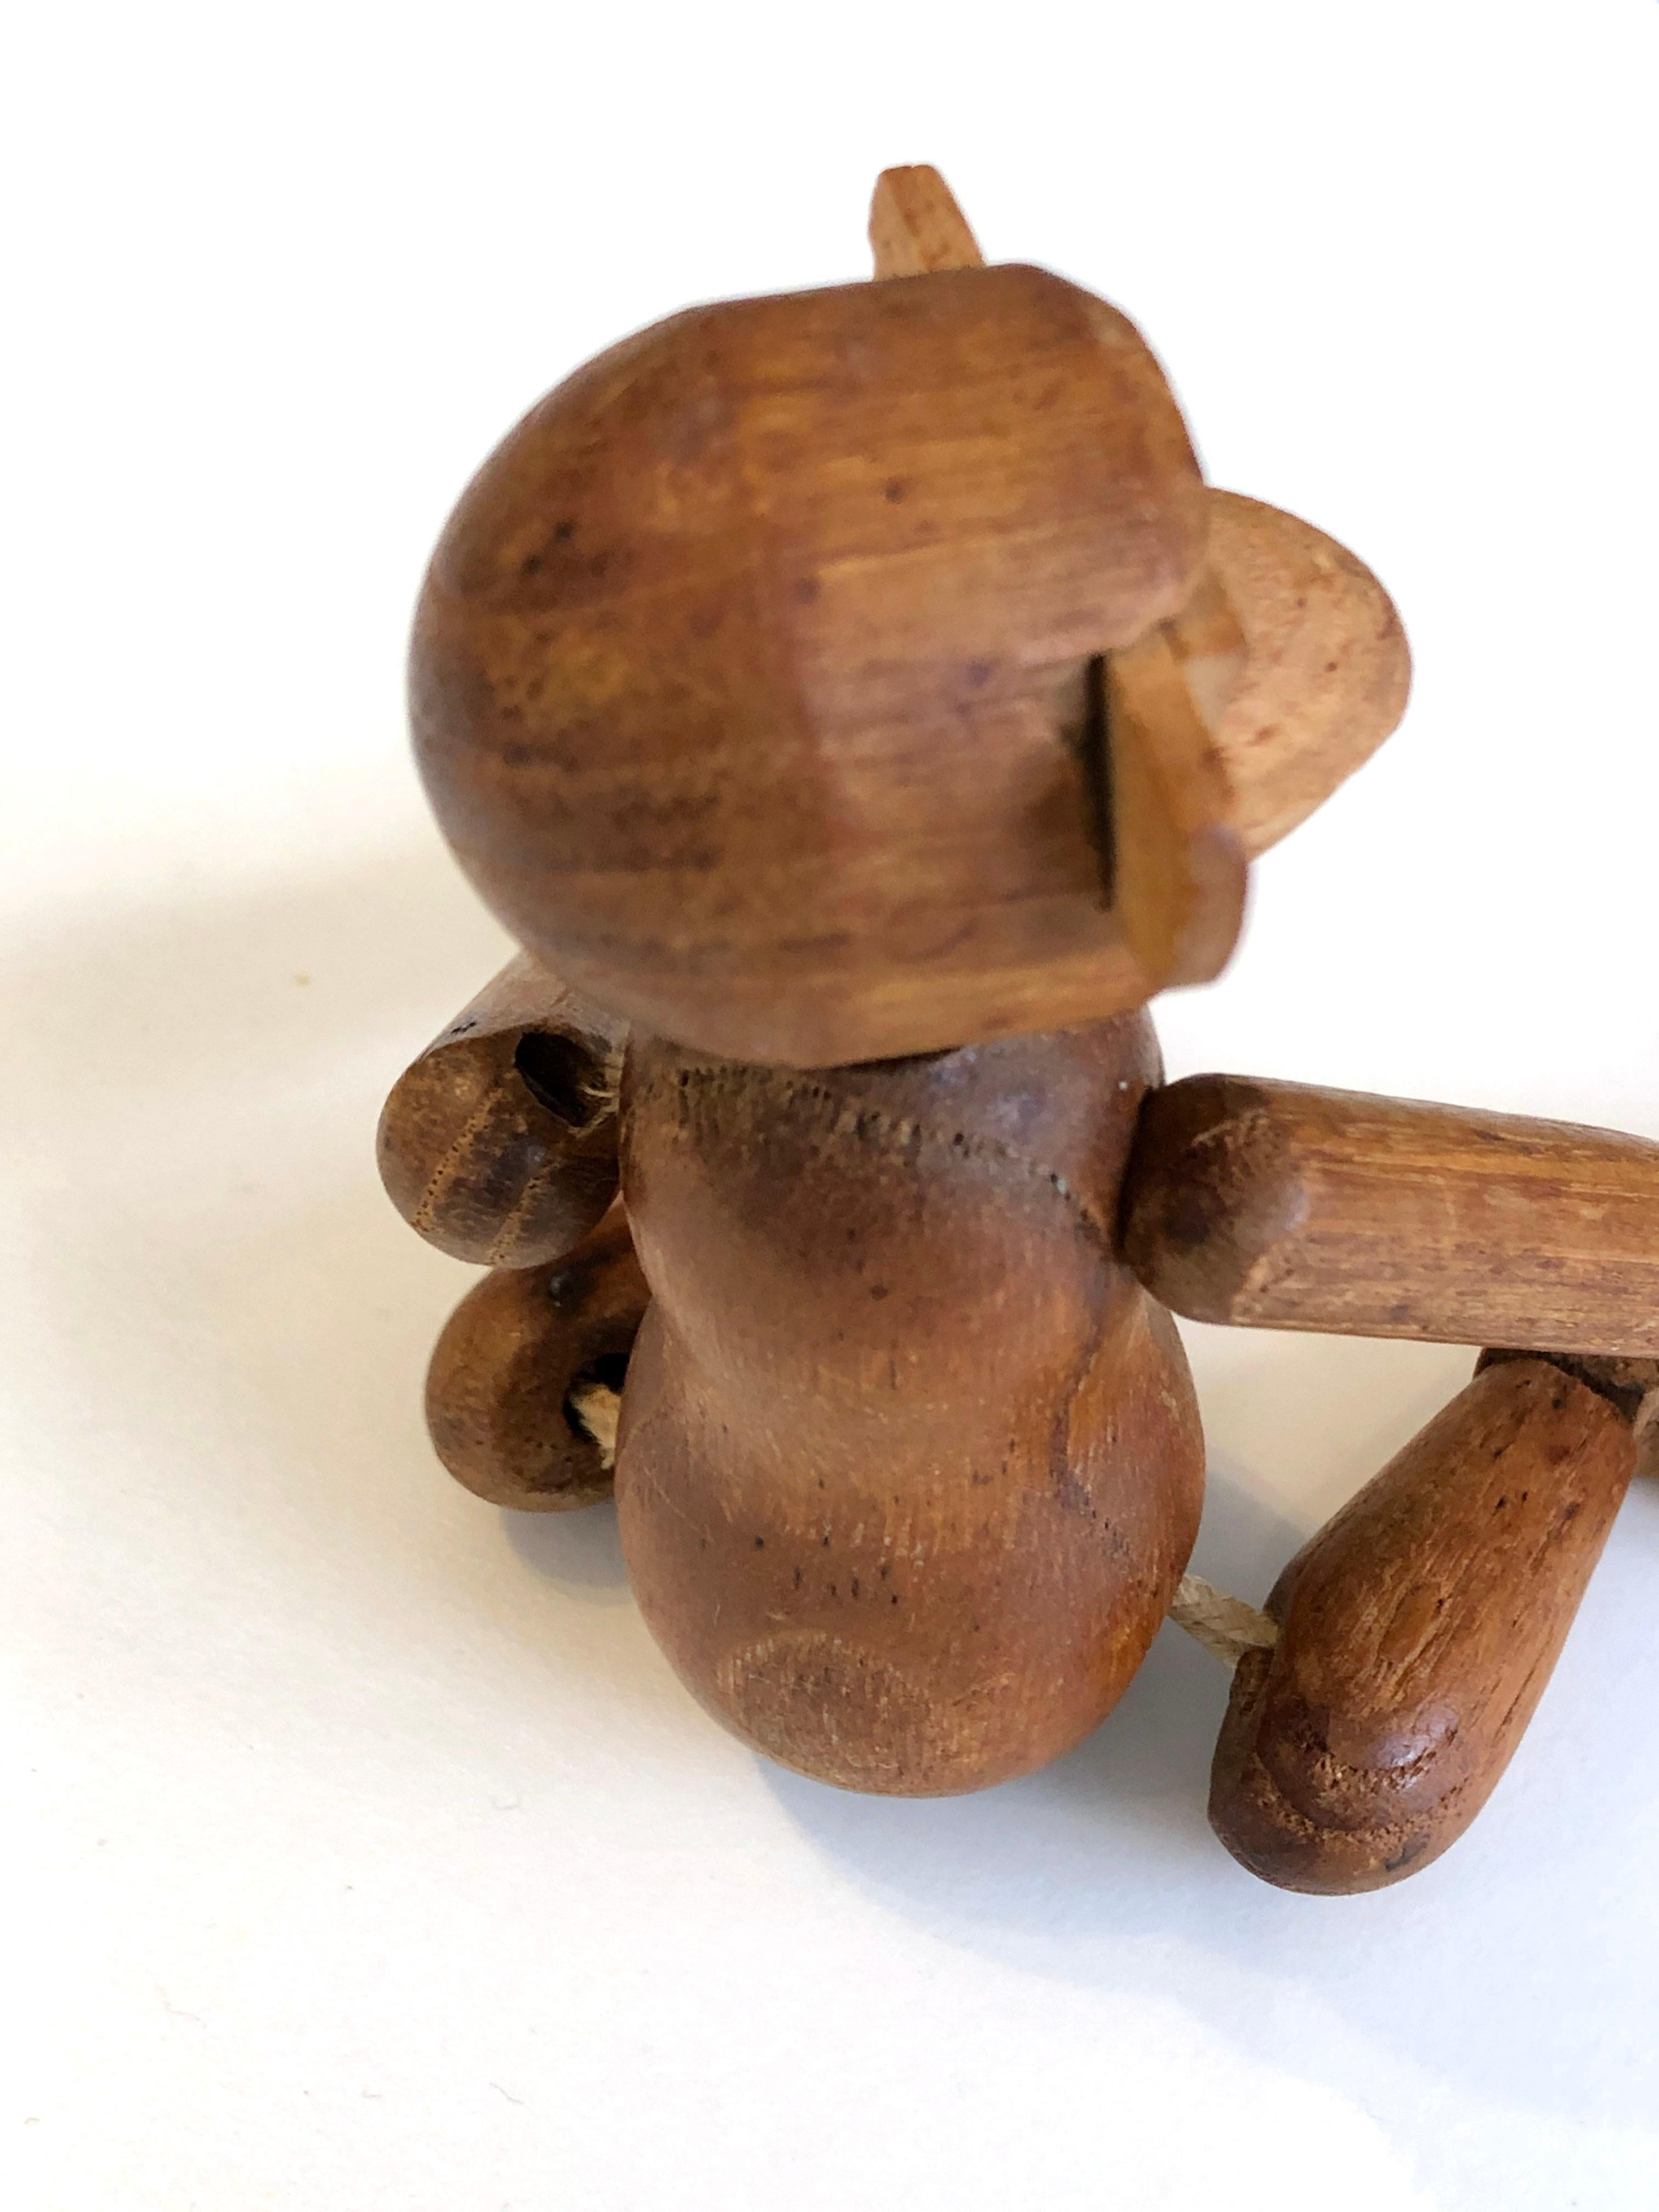 Vintage 1950's small wooden monkey - Kay Bojesen style For Sale 8